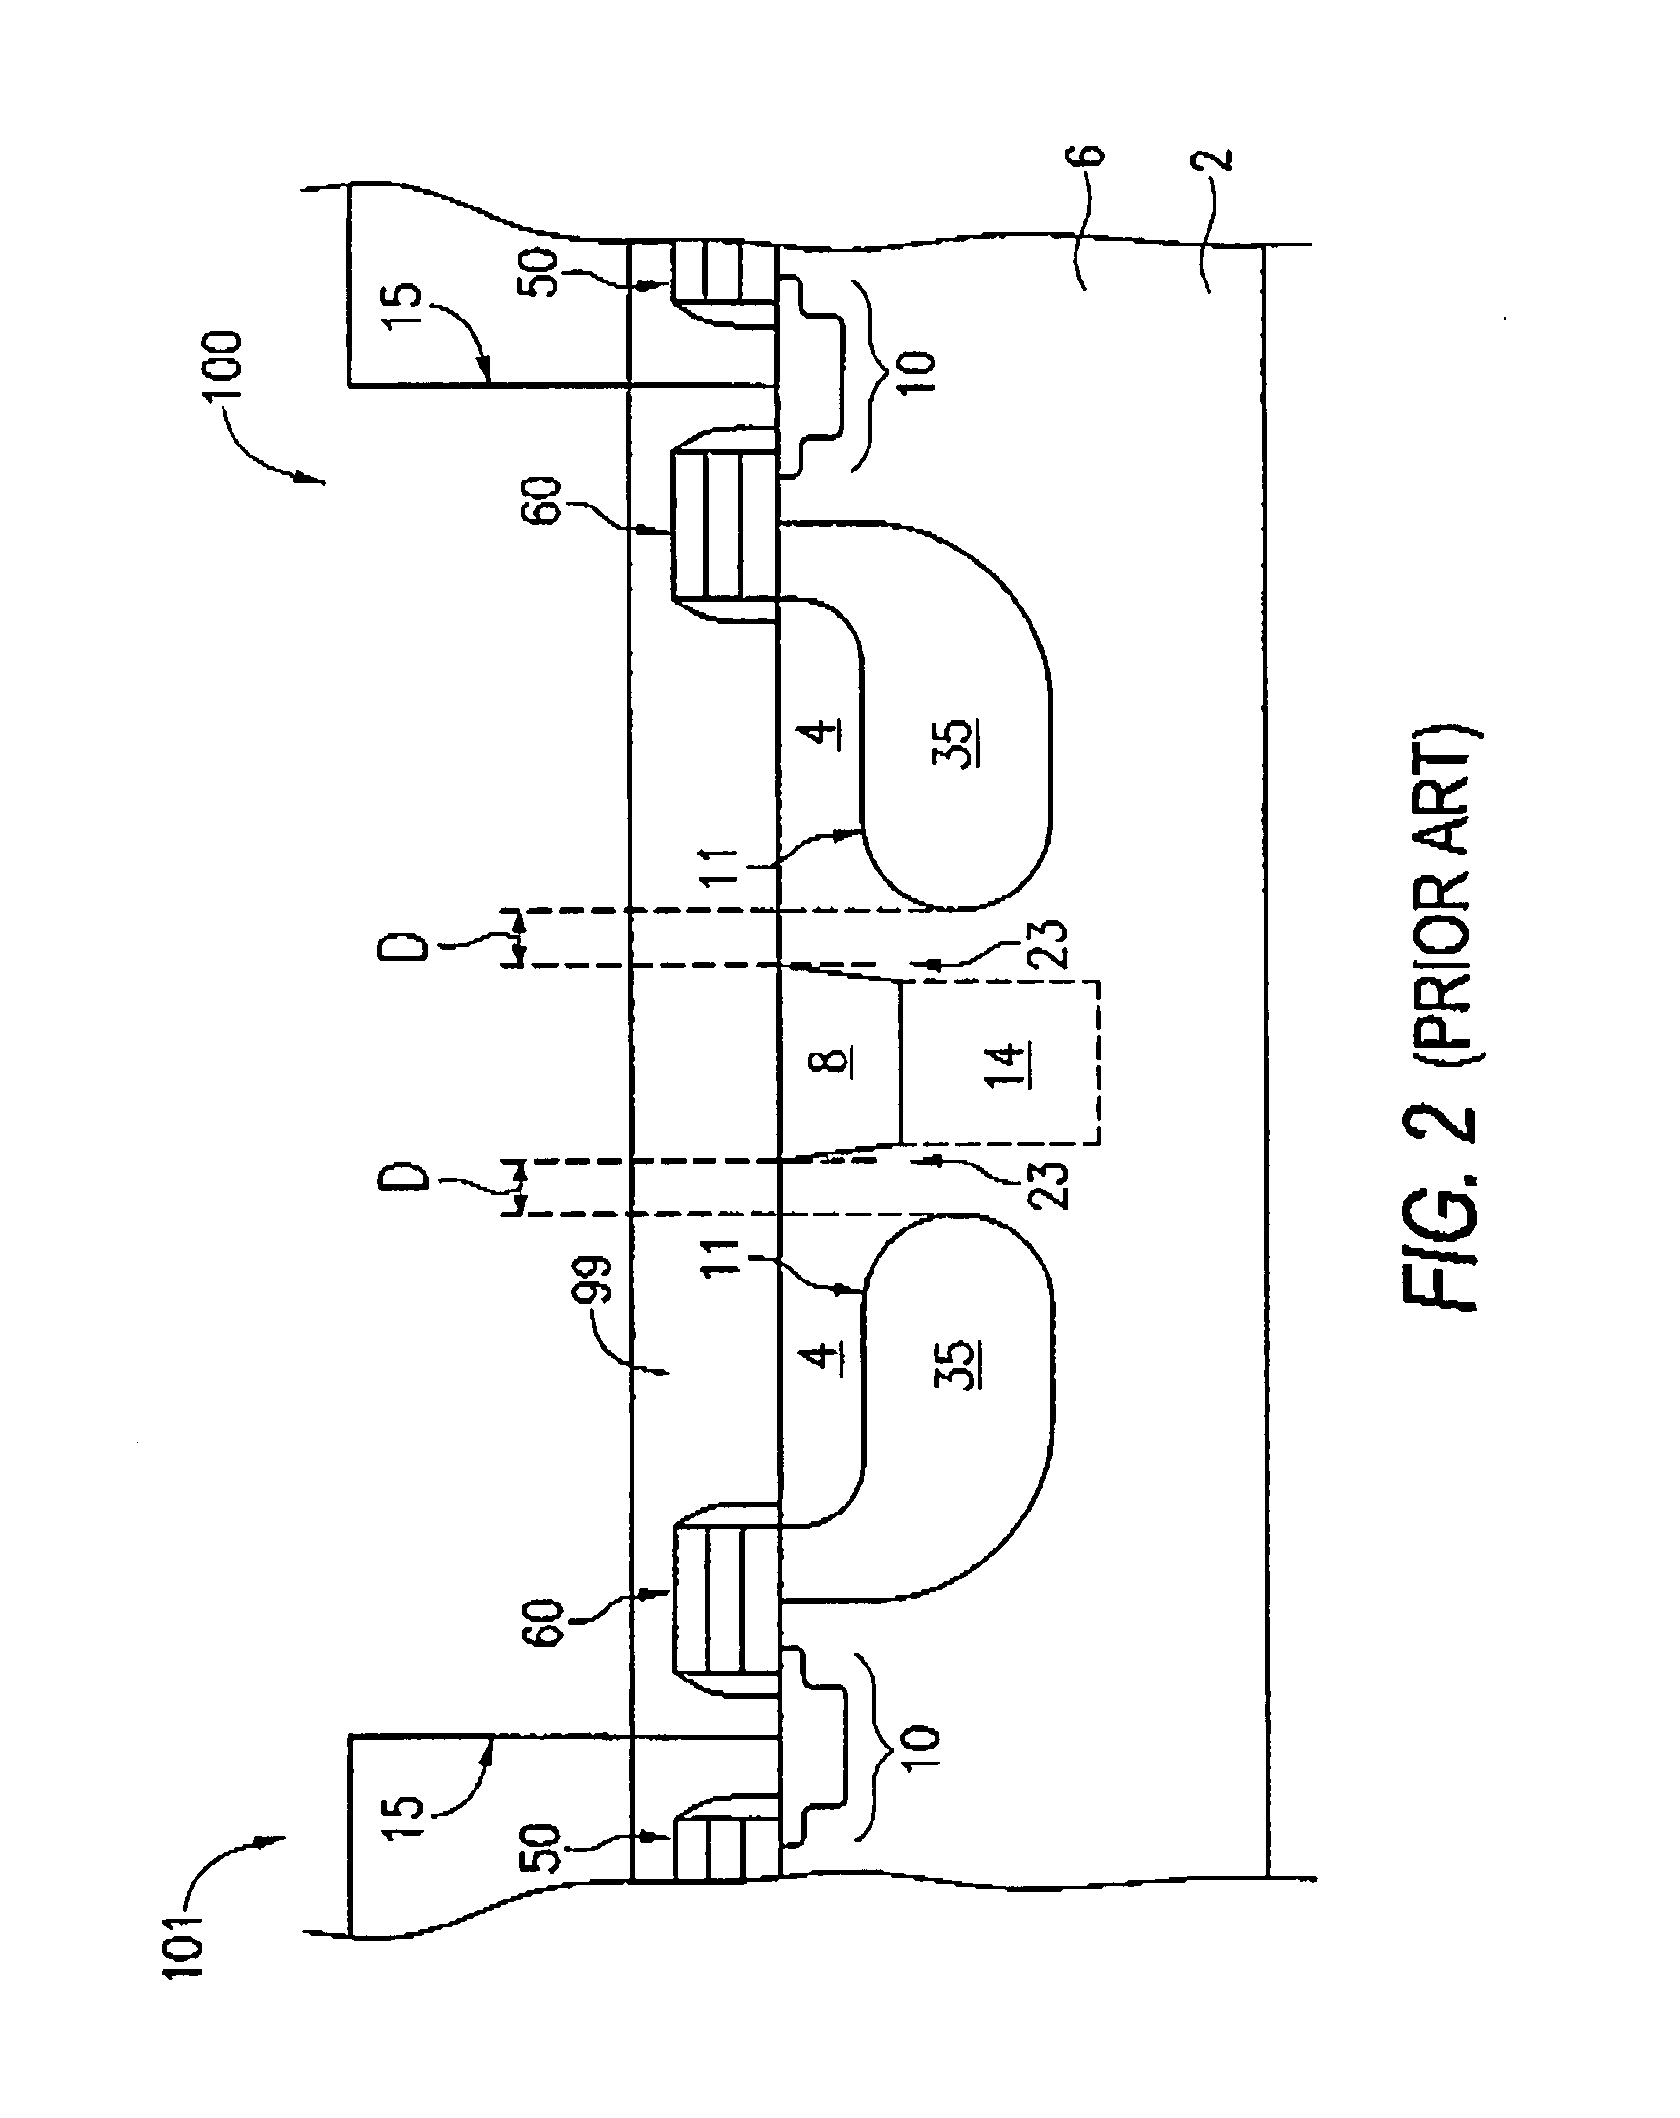 Photodiode structure and image pixel structure